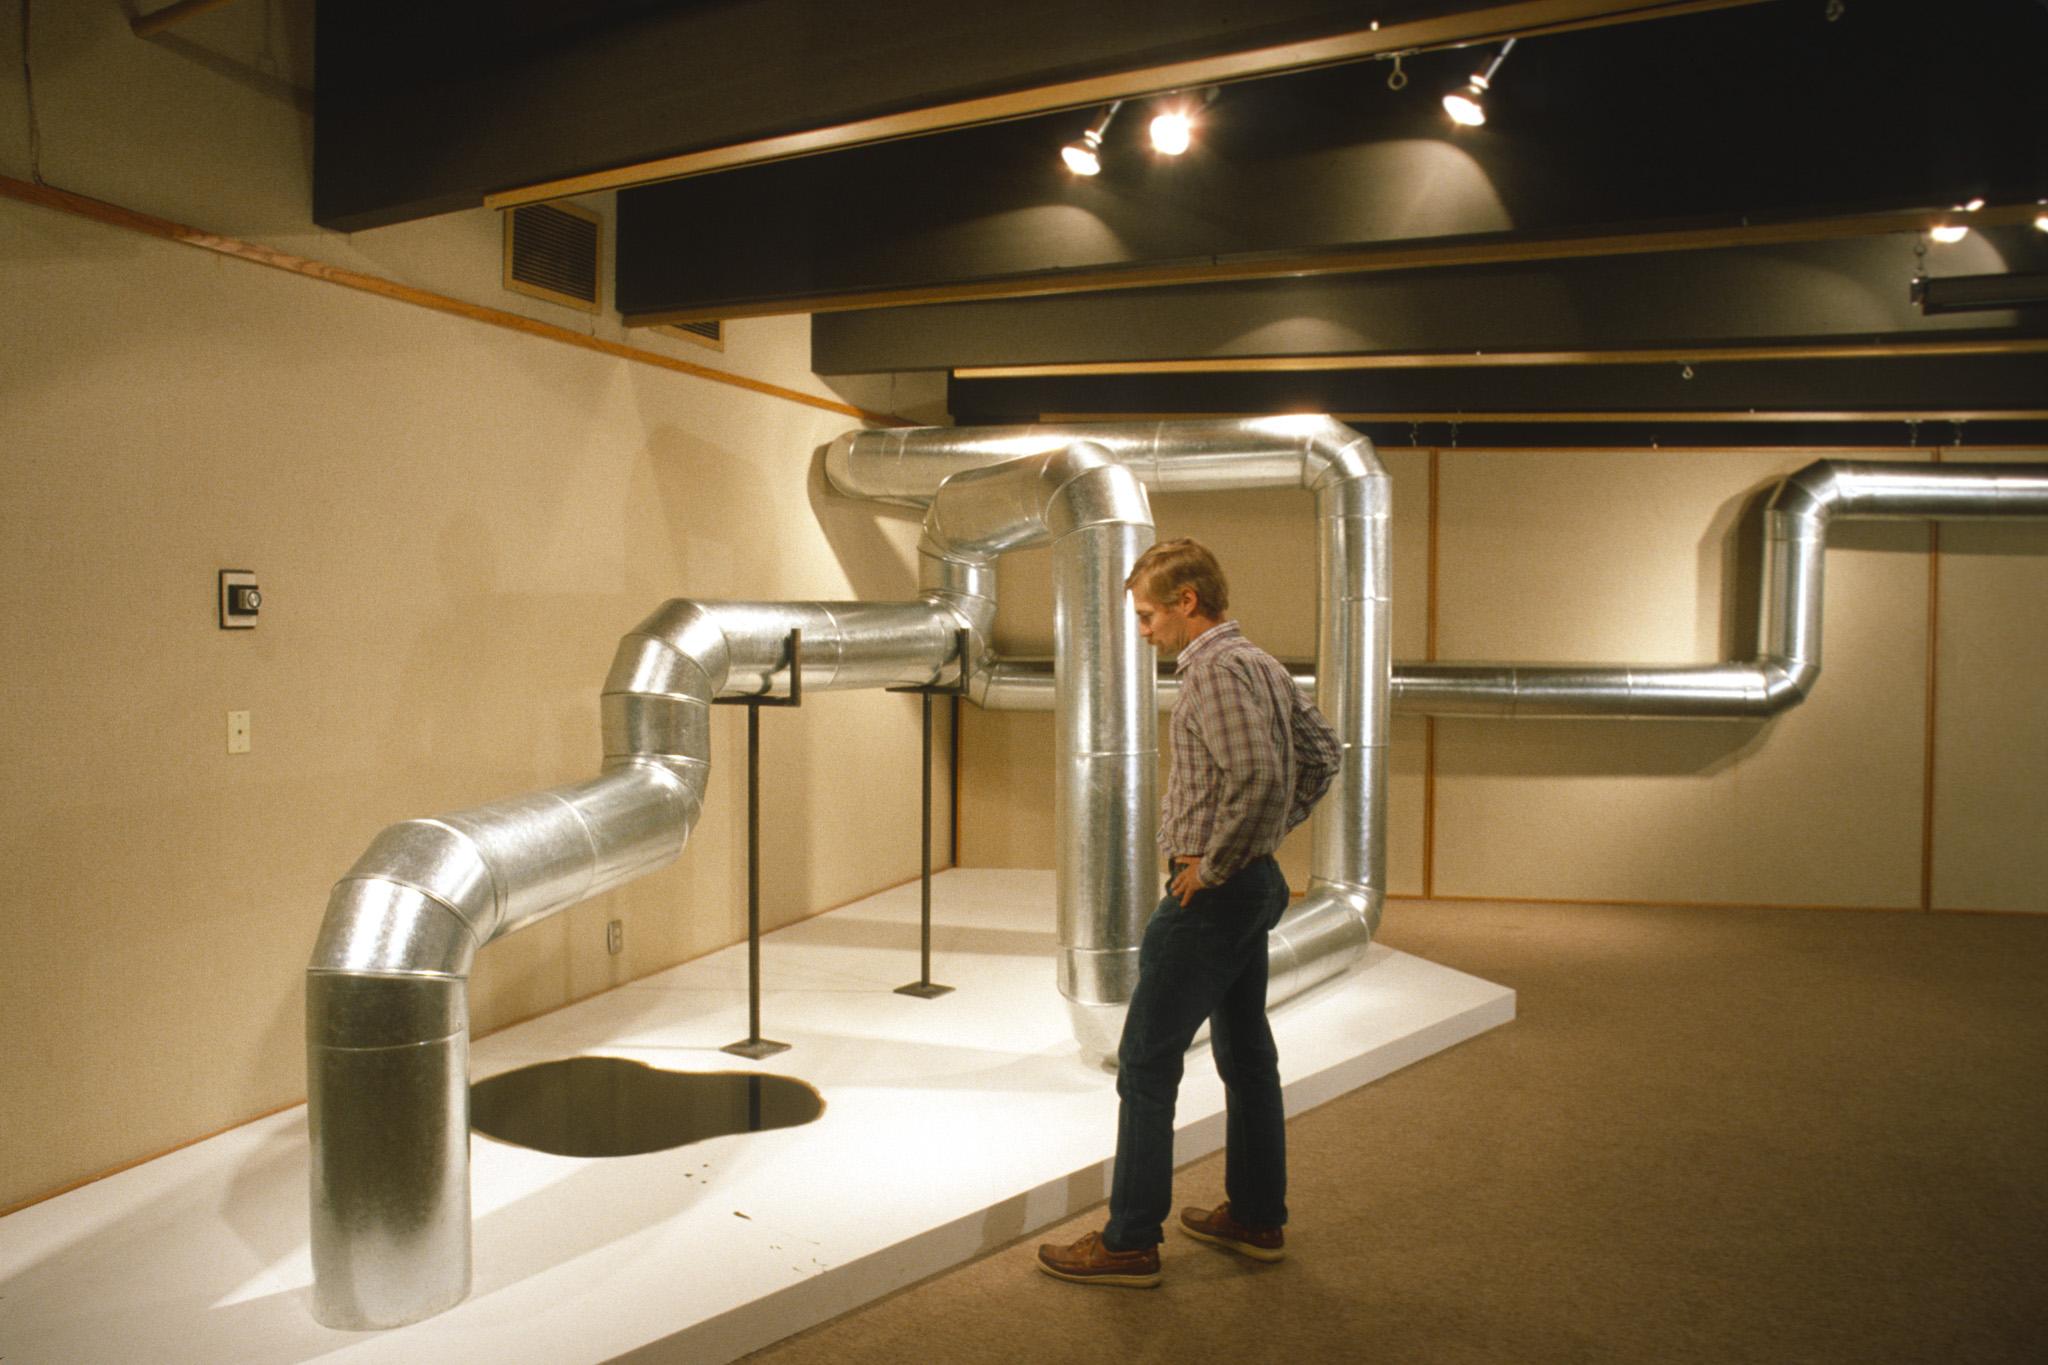 a person stands next to a sculpture made of steel duct that zig zags through the air and along the walls in a basement gallery space